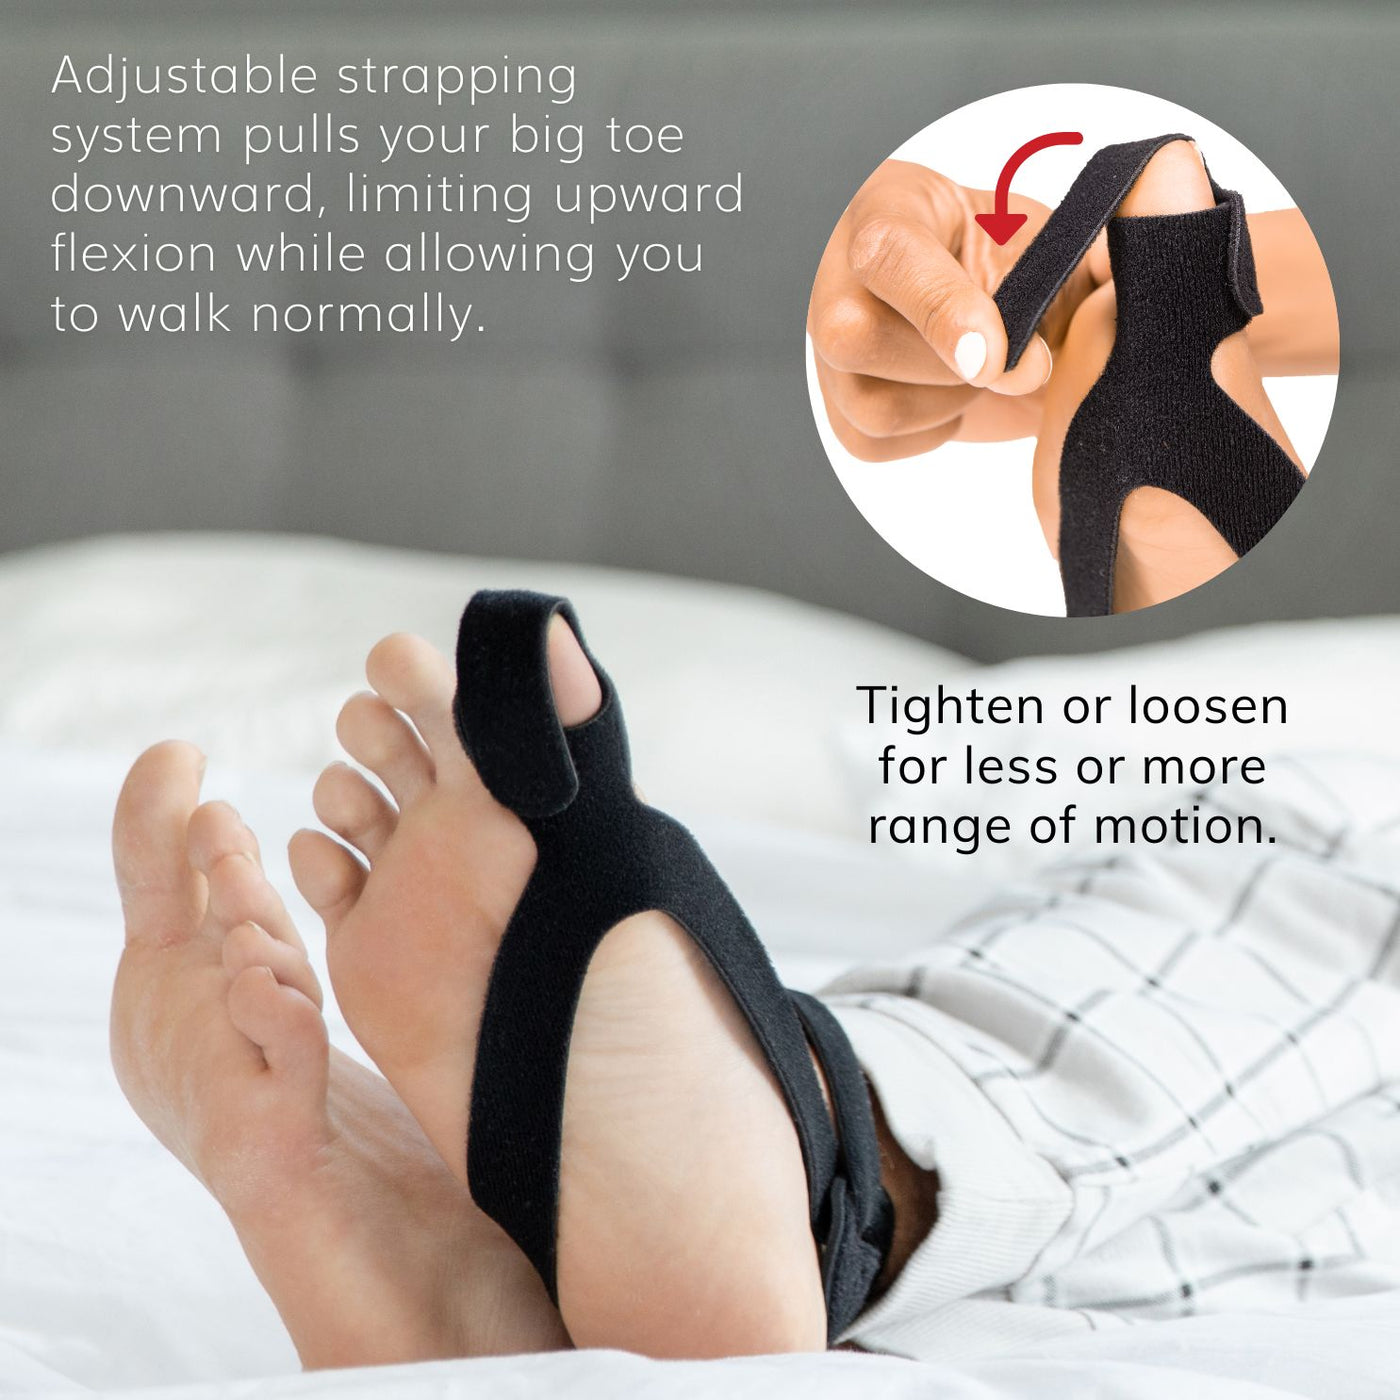 The medical-grade turf toe brace has adjustable straps that help limit range of motion in the big toe